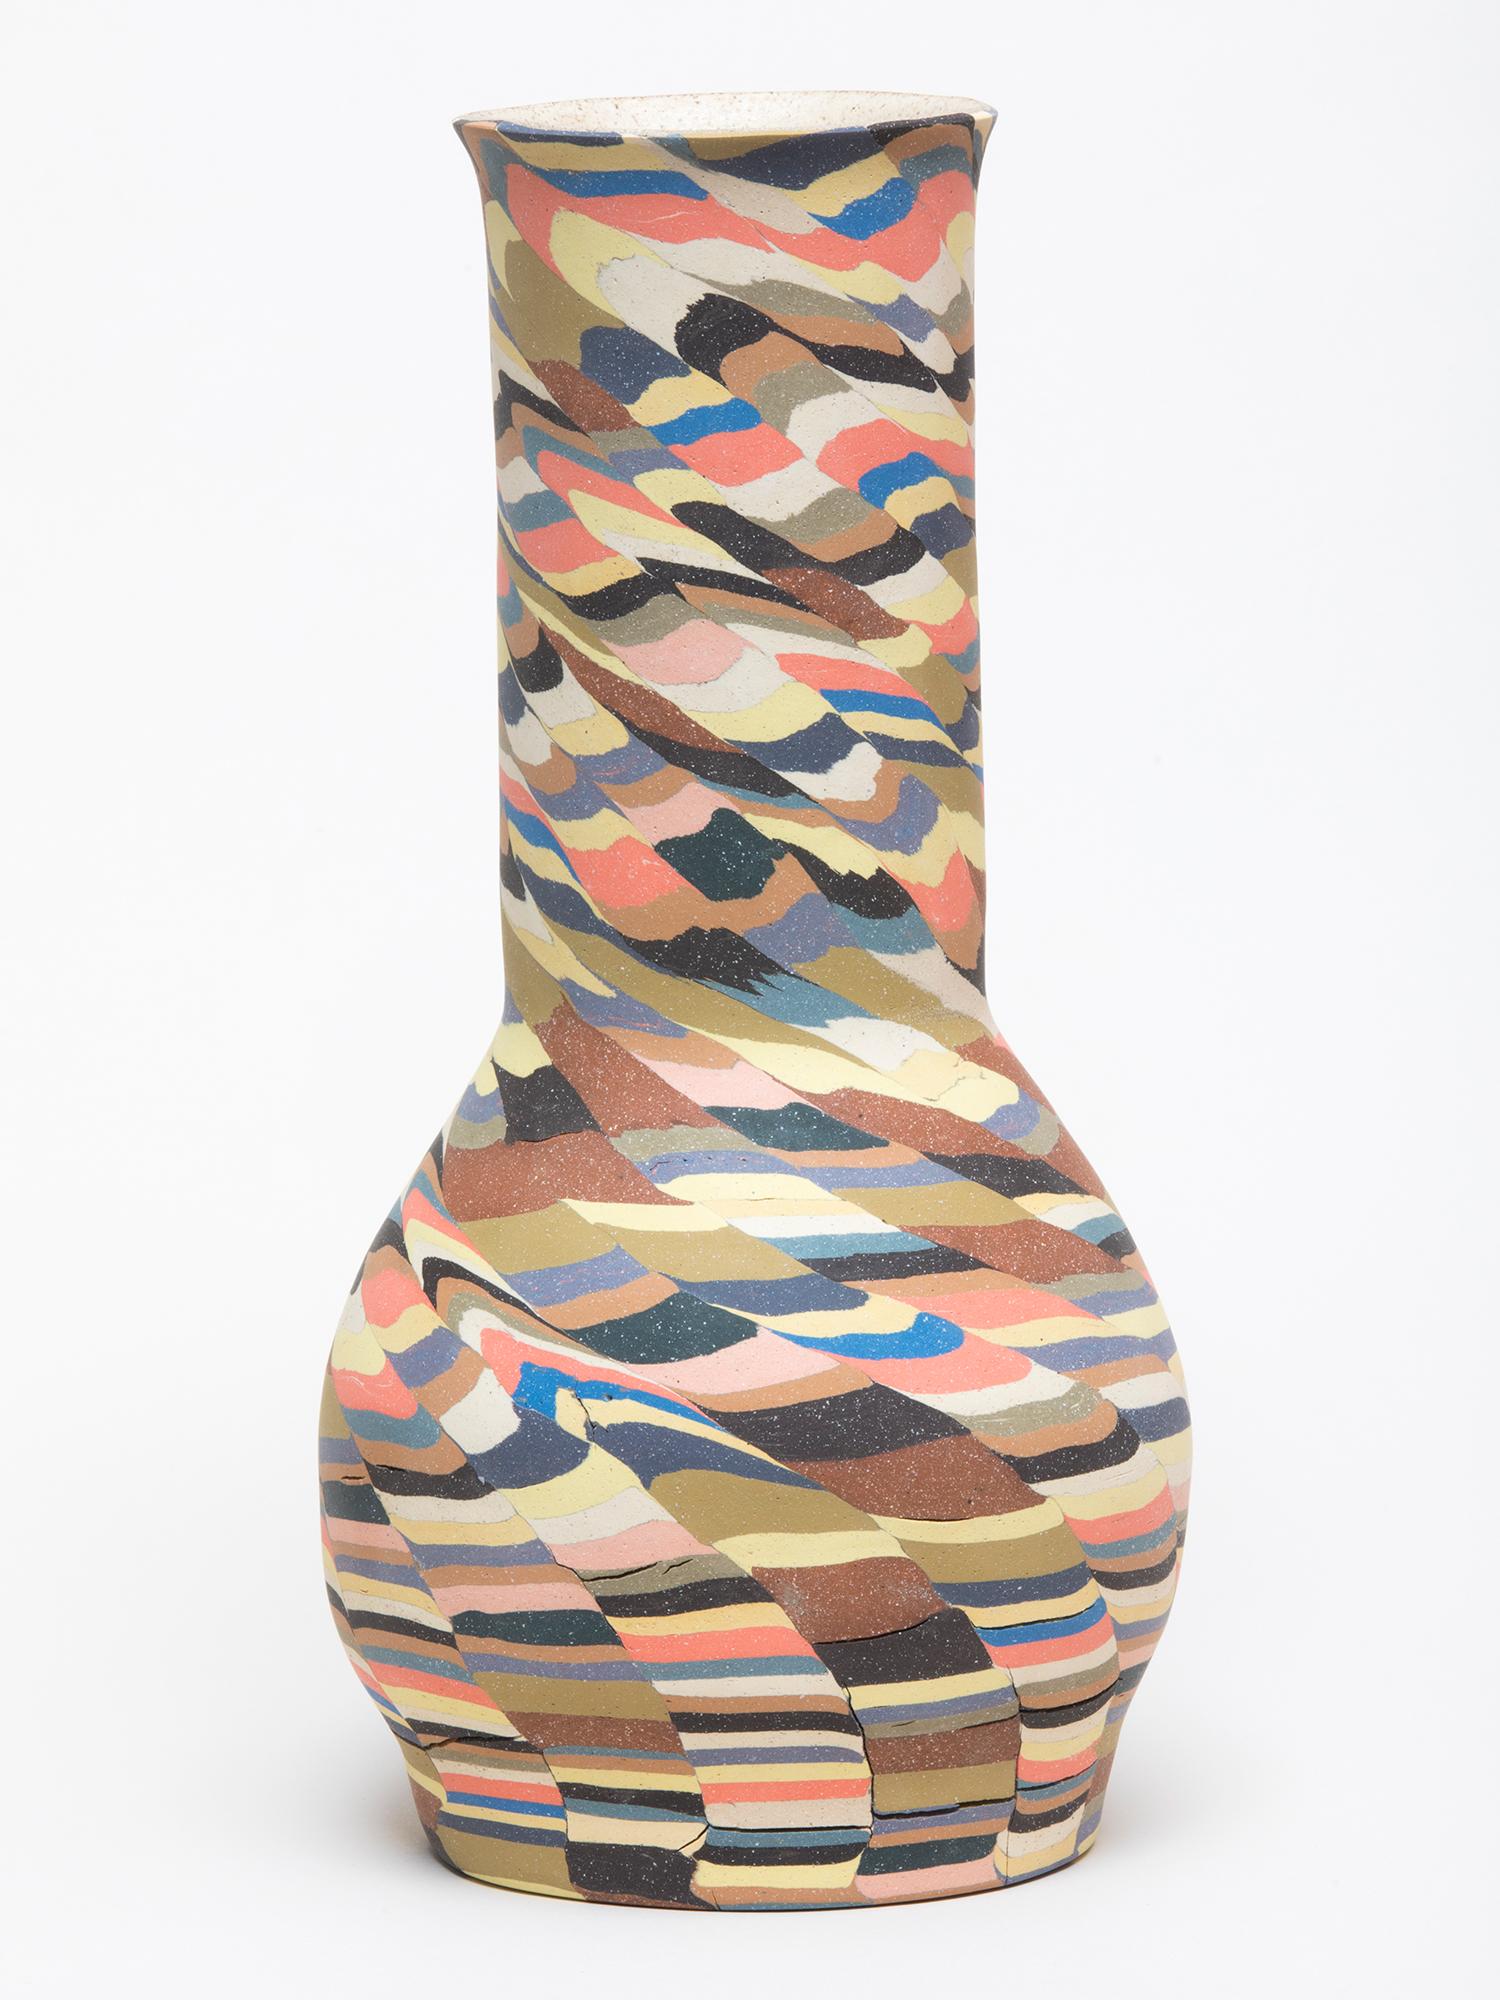 The first in a series of wheel-formed and hand-inlaid ceramic vessels by Brooklyn-based artist Cody Hoyt, thrown on the wheel in collaboration with Sophia Rubio. Each vase is completely unique and has a glazed interior so it can hold water and